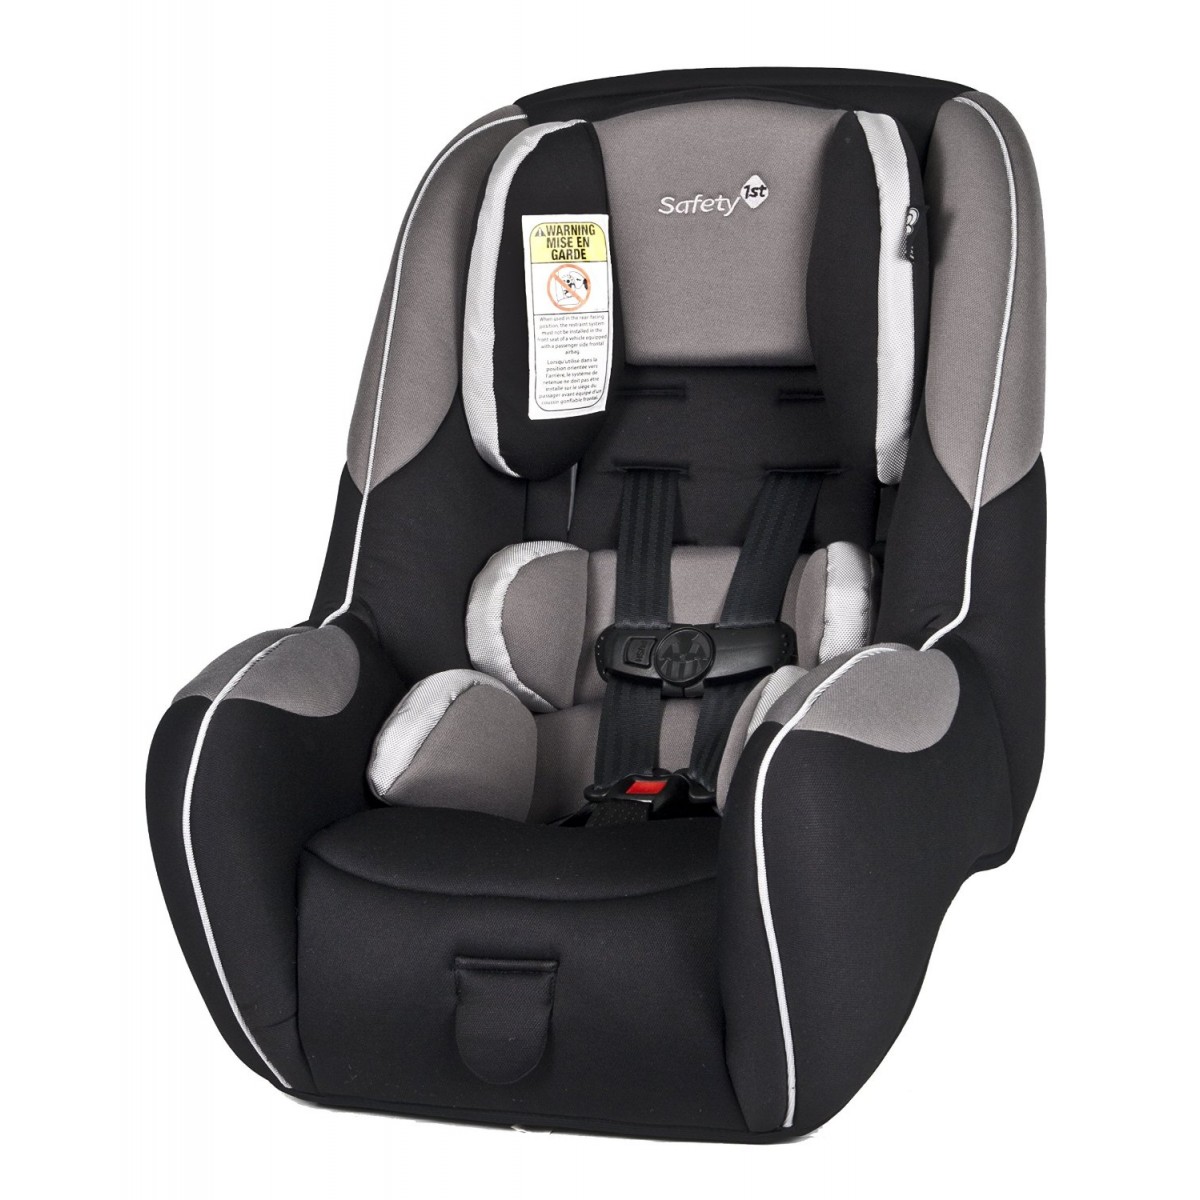 Safety 1st Guide 65 Convertible Car Seat Review Auto by Mars